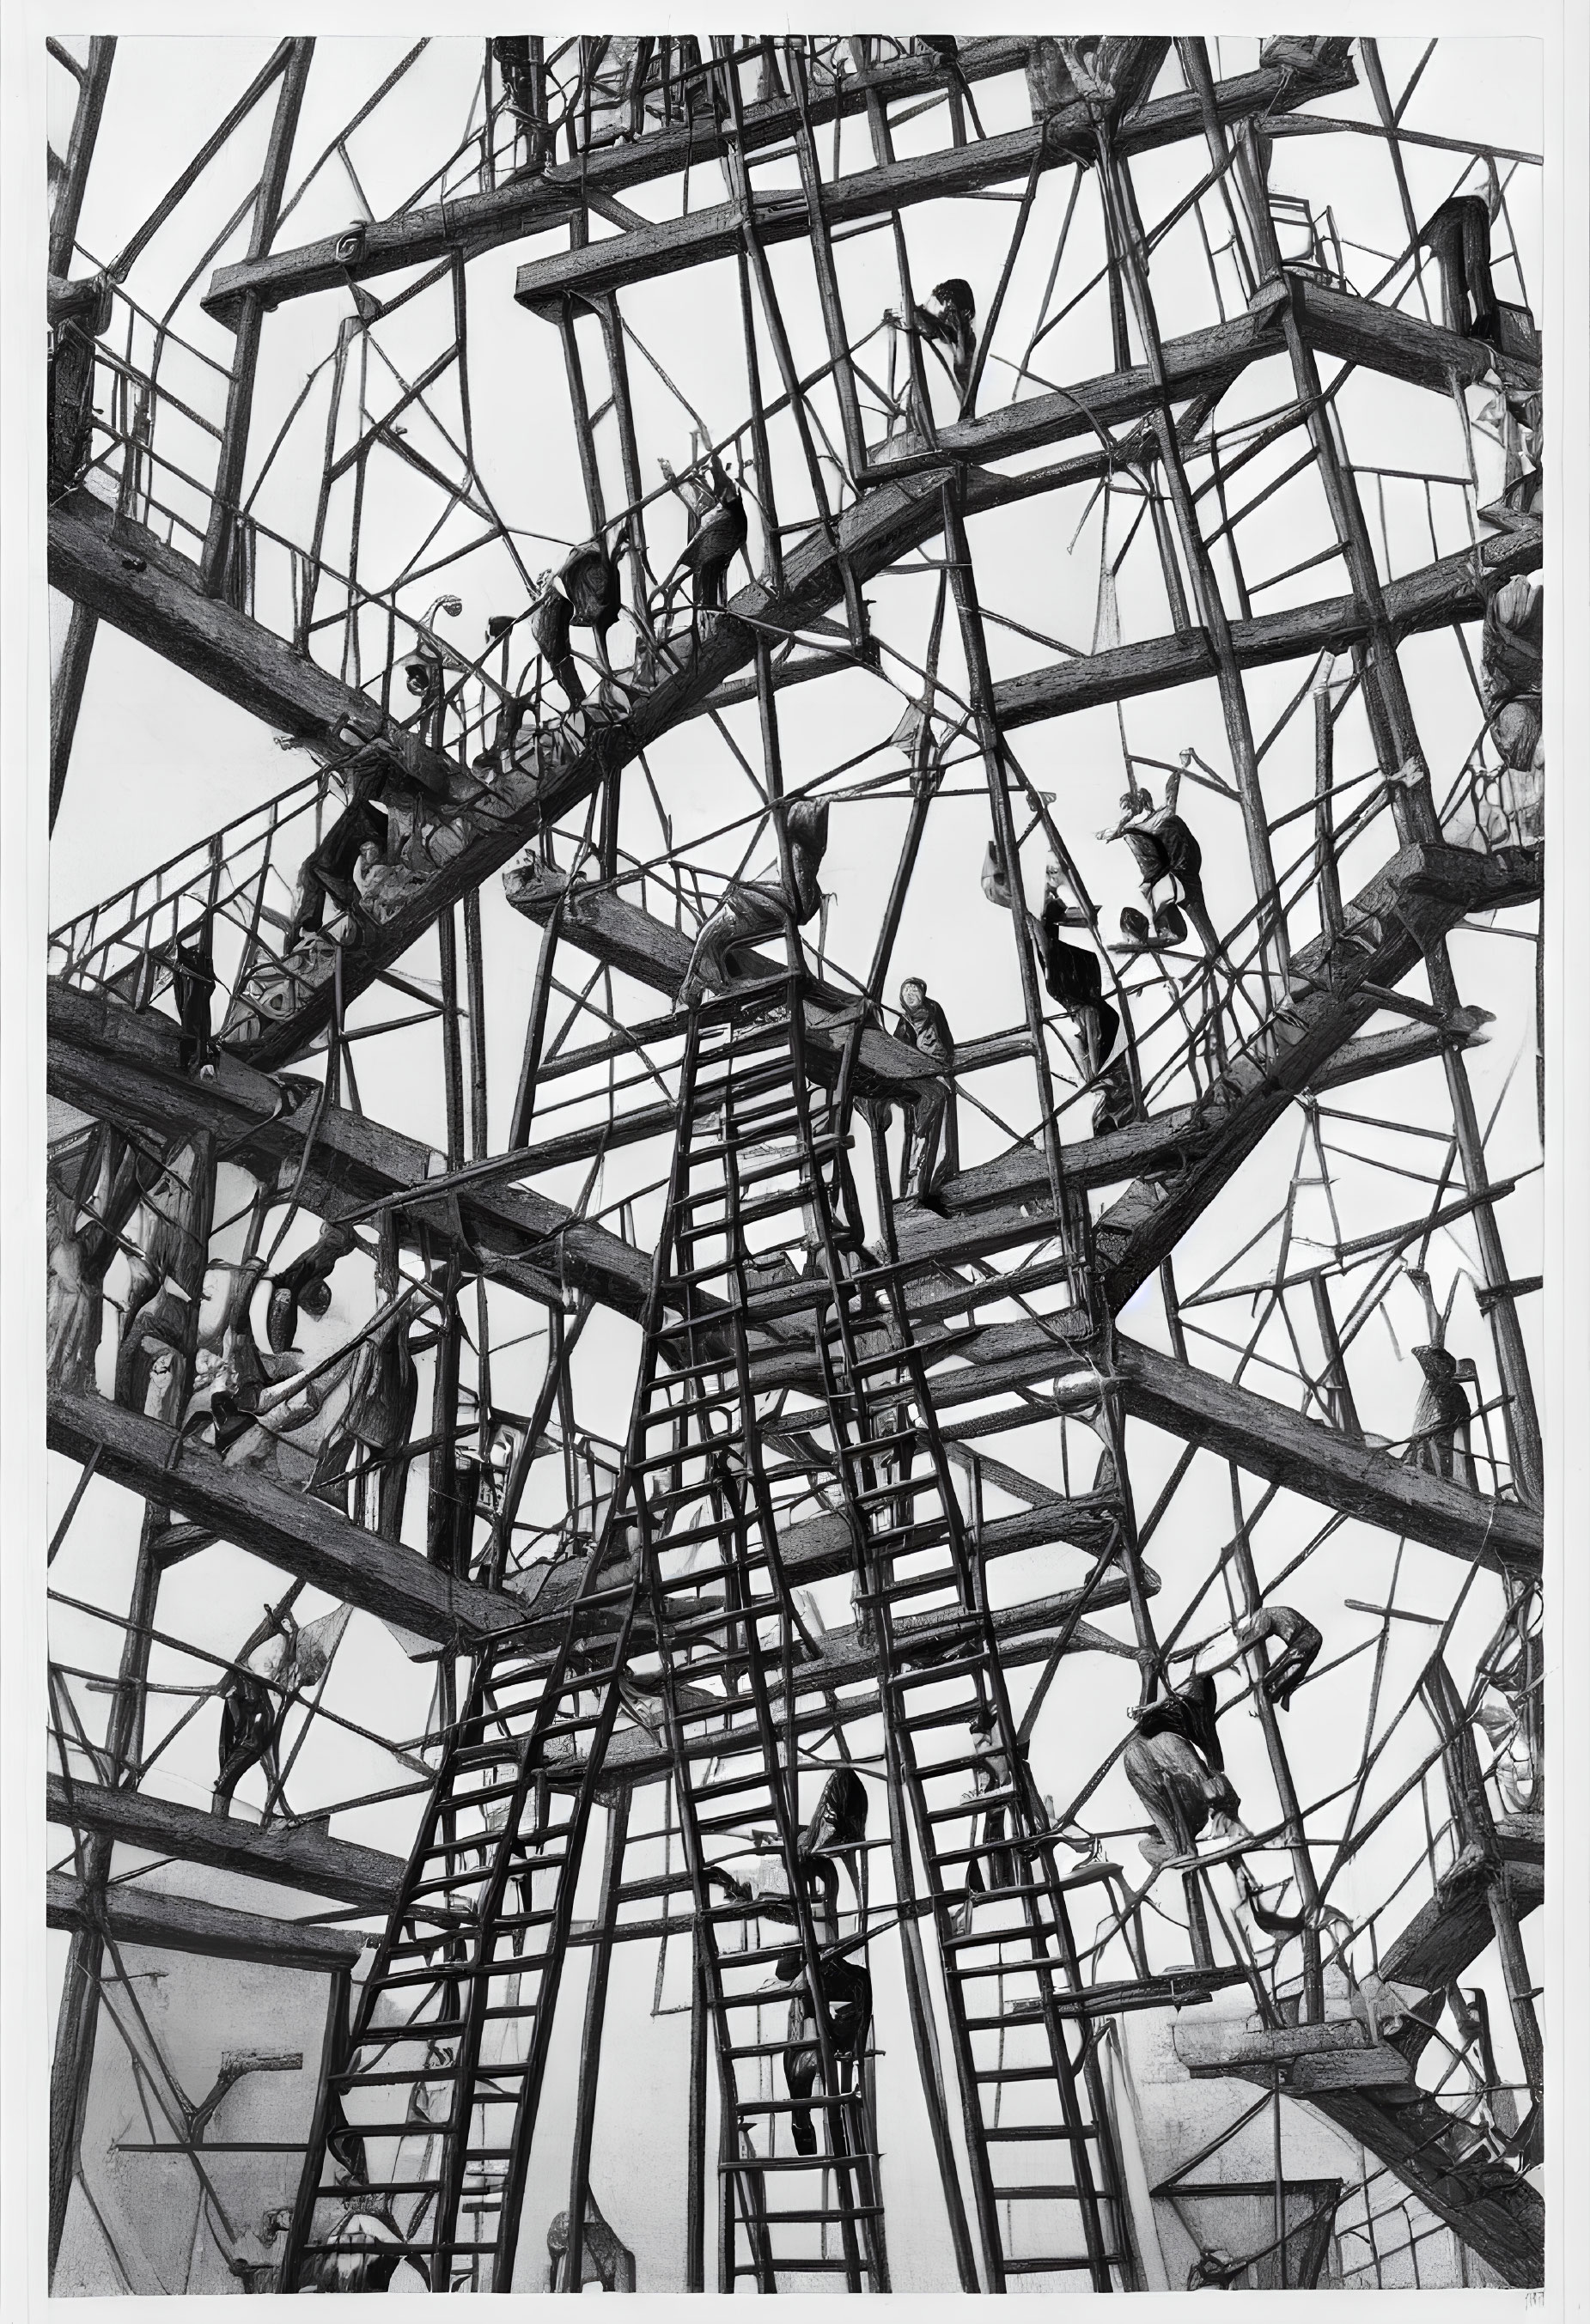 Busy scene of workers on intricate scaffolding